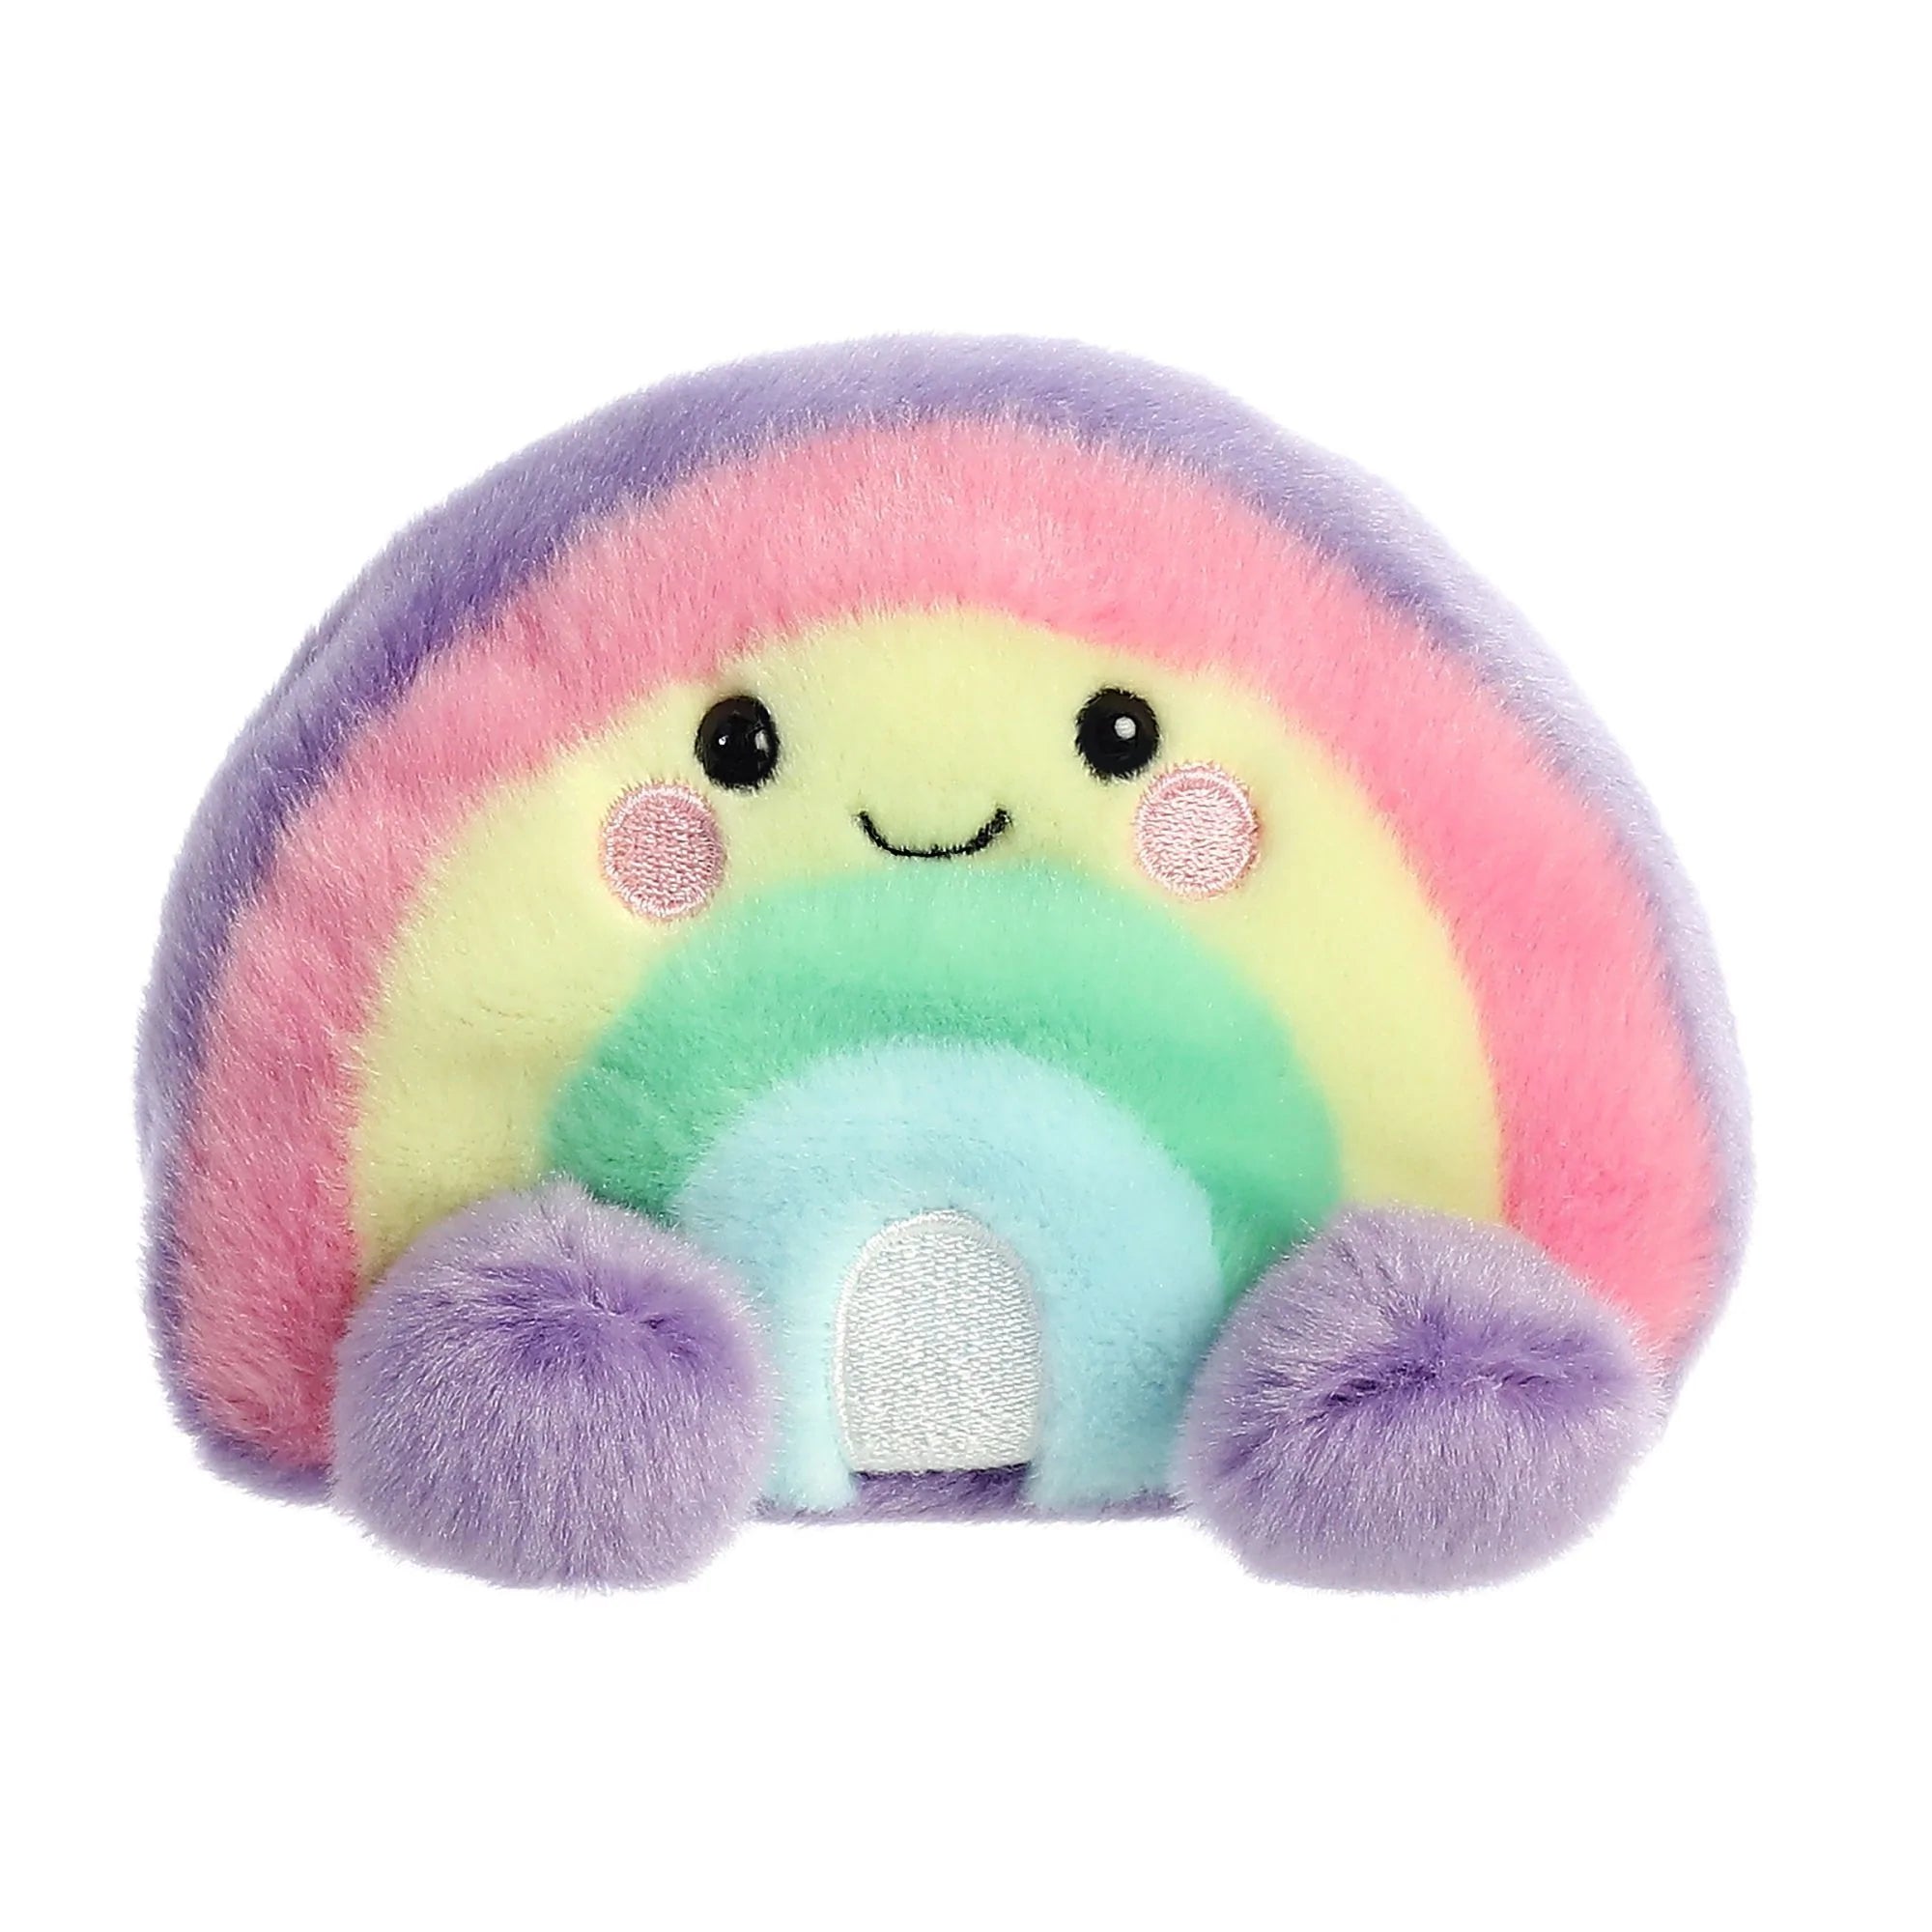 A bright, soft, friendly soft toy rainbow soft toy measuring 5 inches in size.